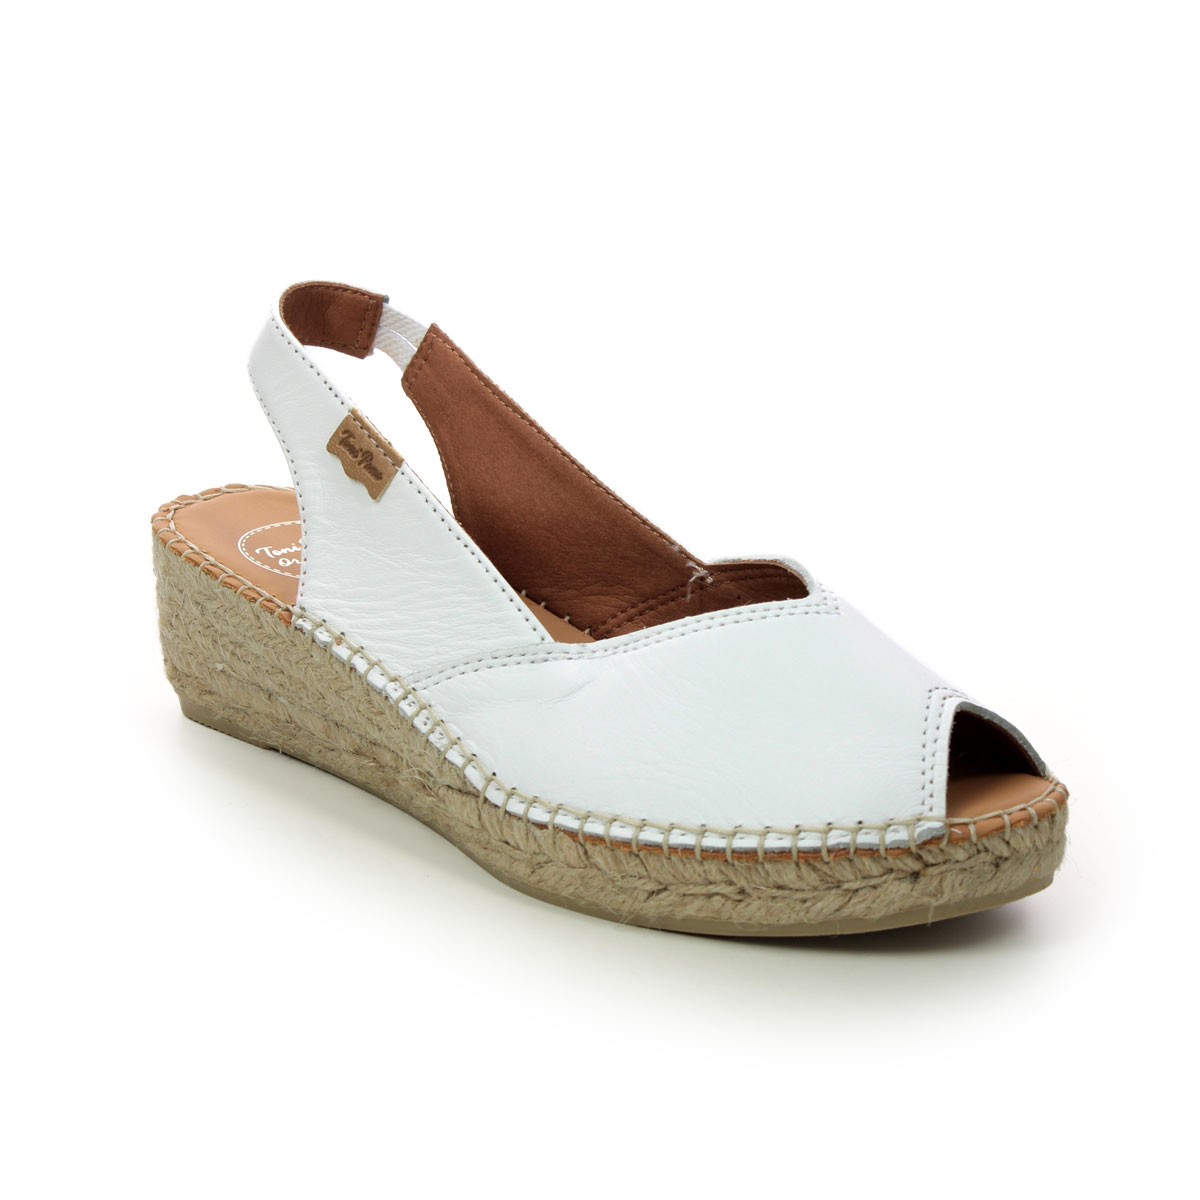 Toni Pons Bernia P WHITE LEATHER Womens Espadrilles 2002-61 in a Plain Leather in Size 37